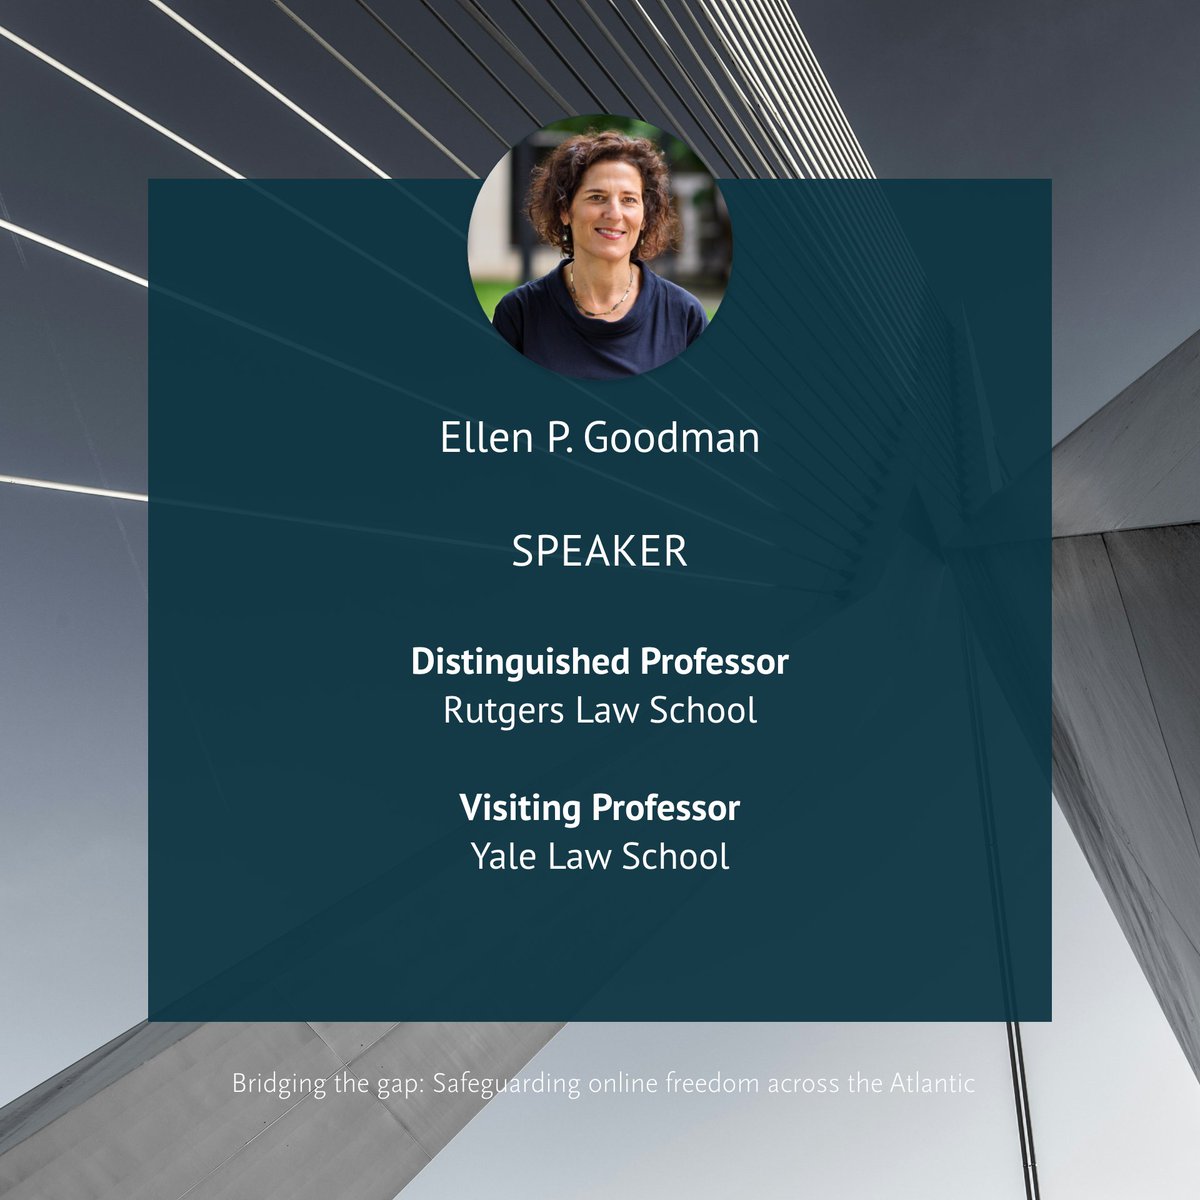 Excited to announce @ellgood, Distinguished Professor @RutgersLaw & former Senior Advisor @CommerceGov as speaker at our panel on #FreeSpeech in the #digitalage! Specialising in information policy law, she brings invaluable insights on platform policies & algorithmic governance.